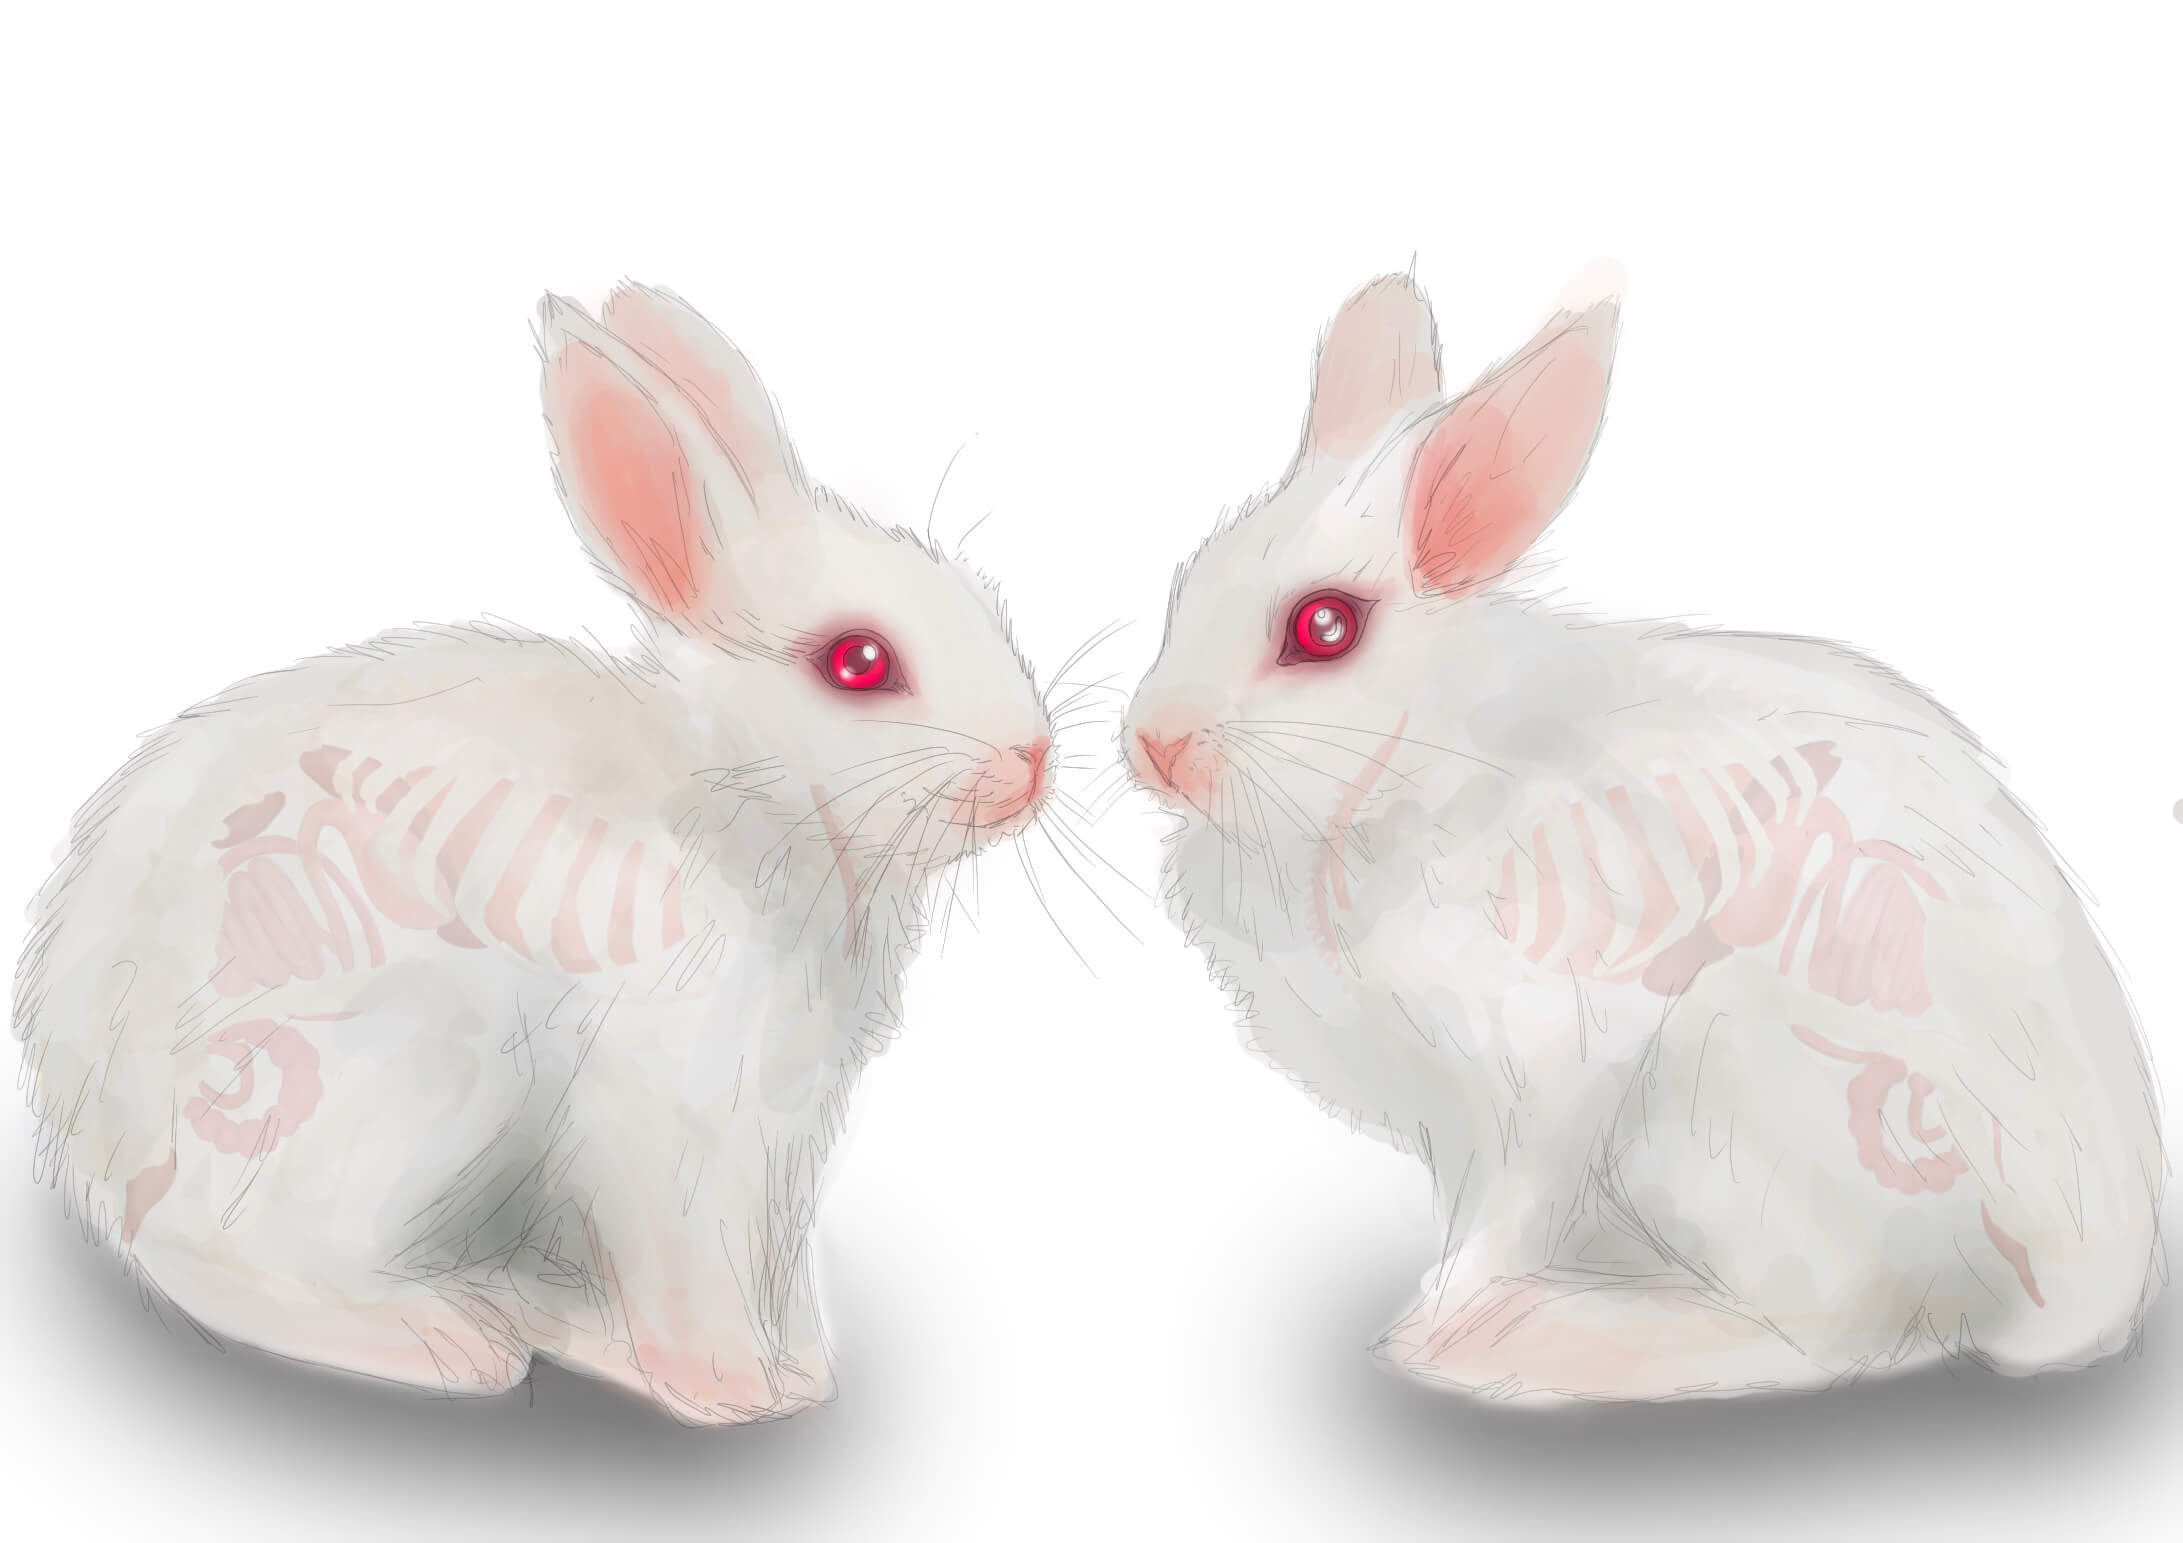 BioDesign Challenge: The Bunny with a Synthetic Heart